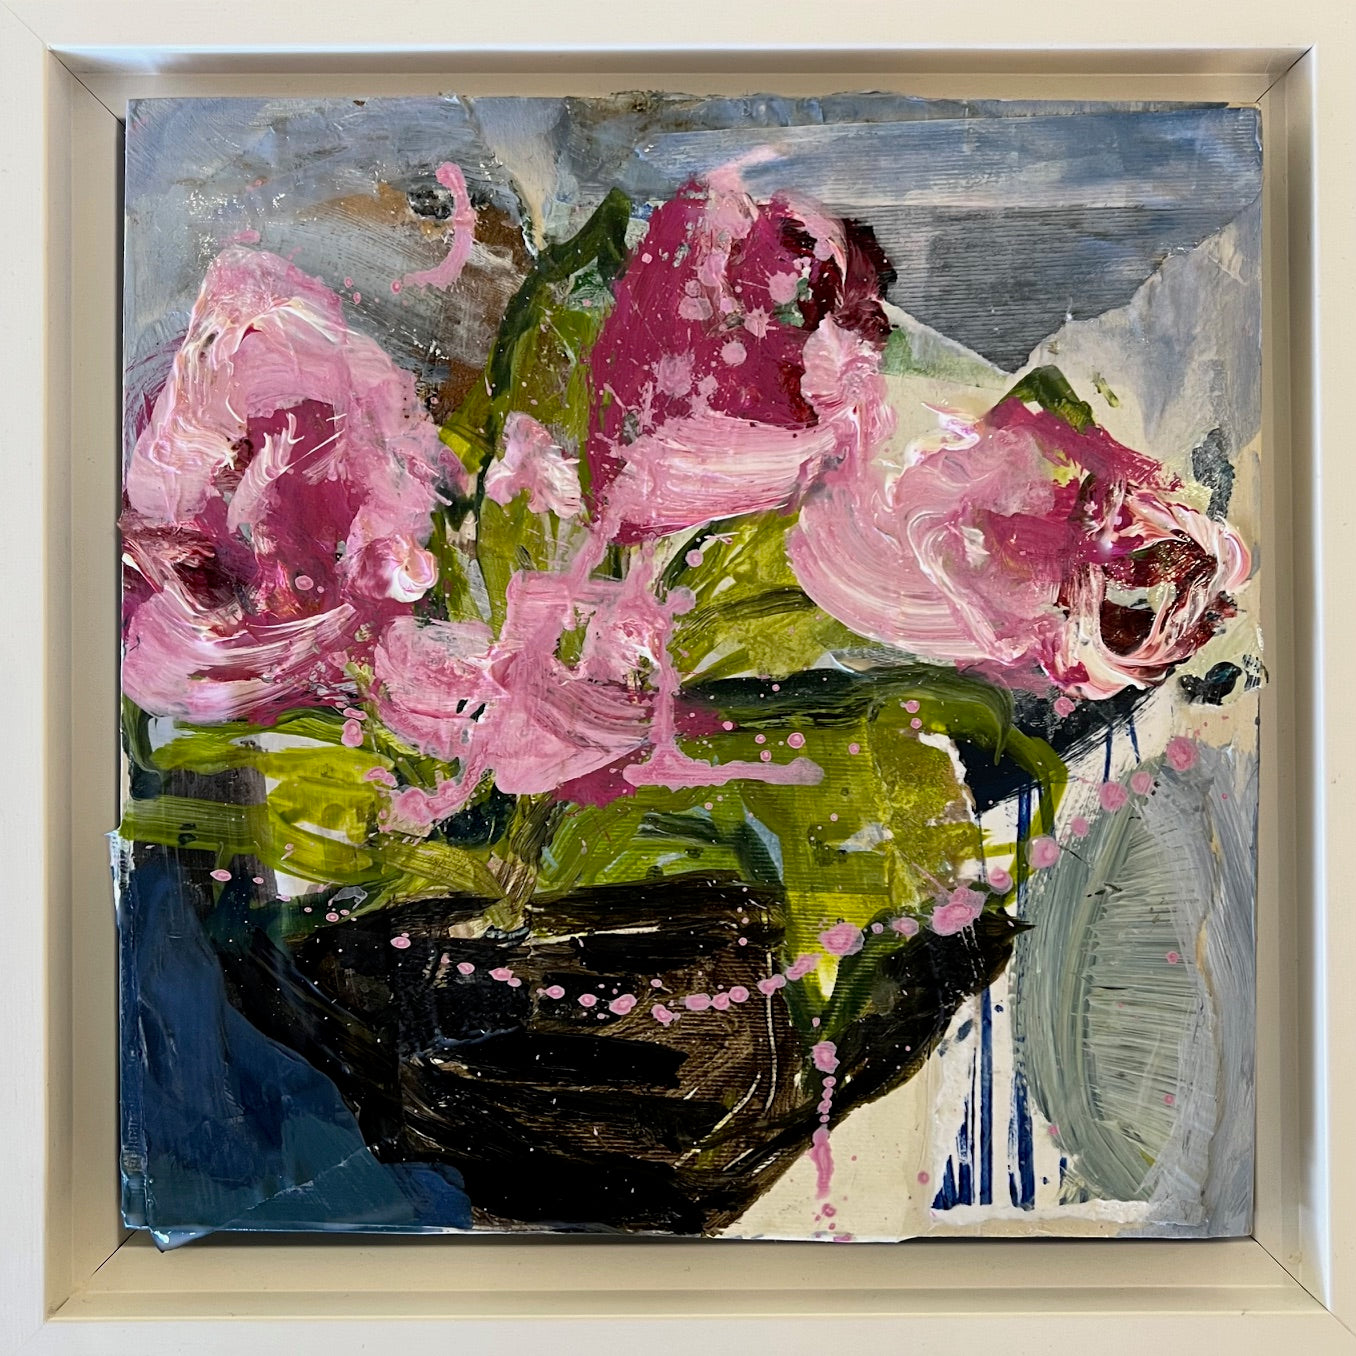 Brown Pot Pink Flowers, mixed media collage, 8" x 8"